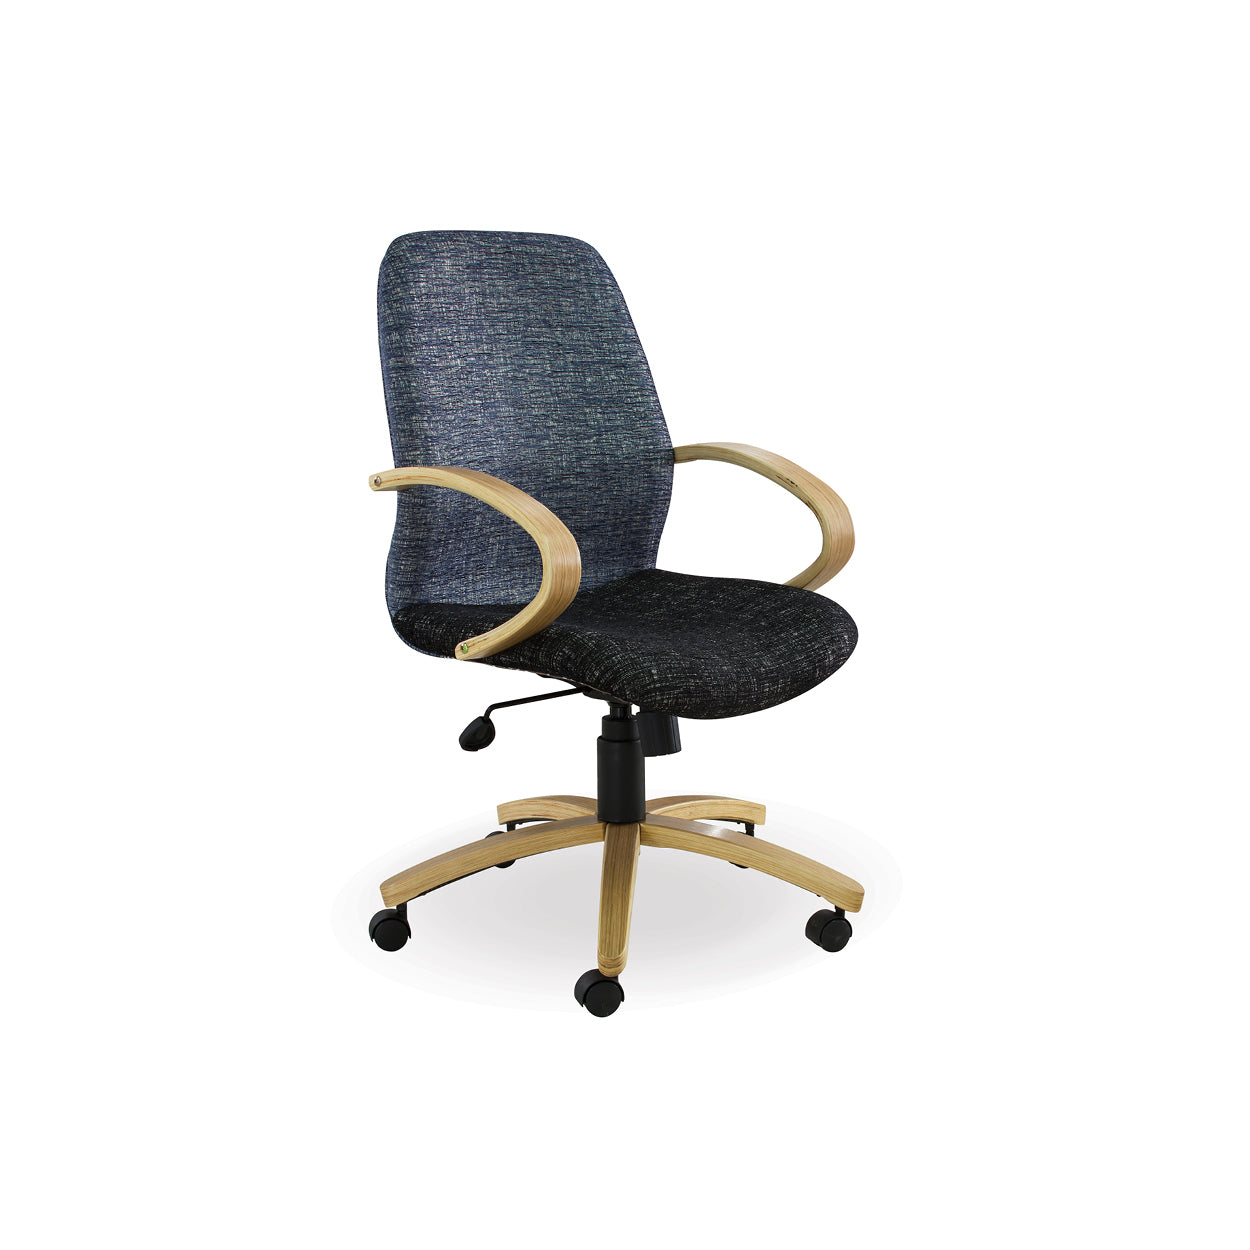 Hedcor Morant Wood mid back office chair